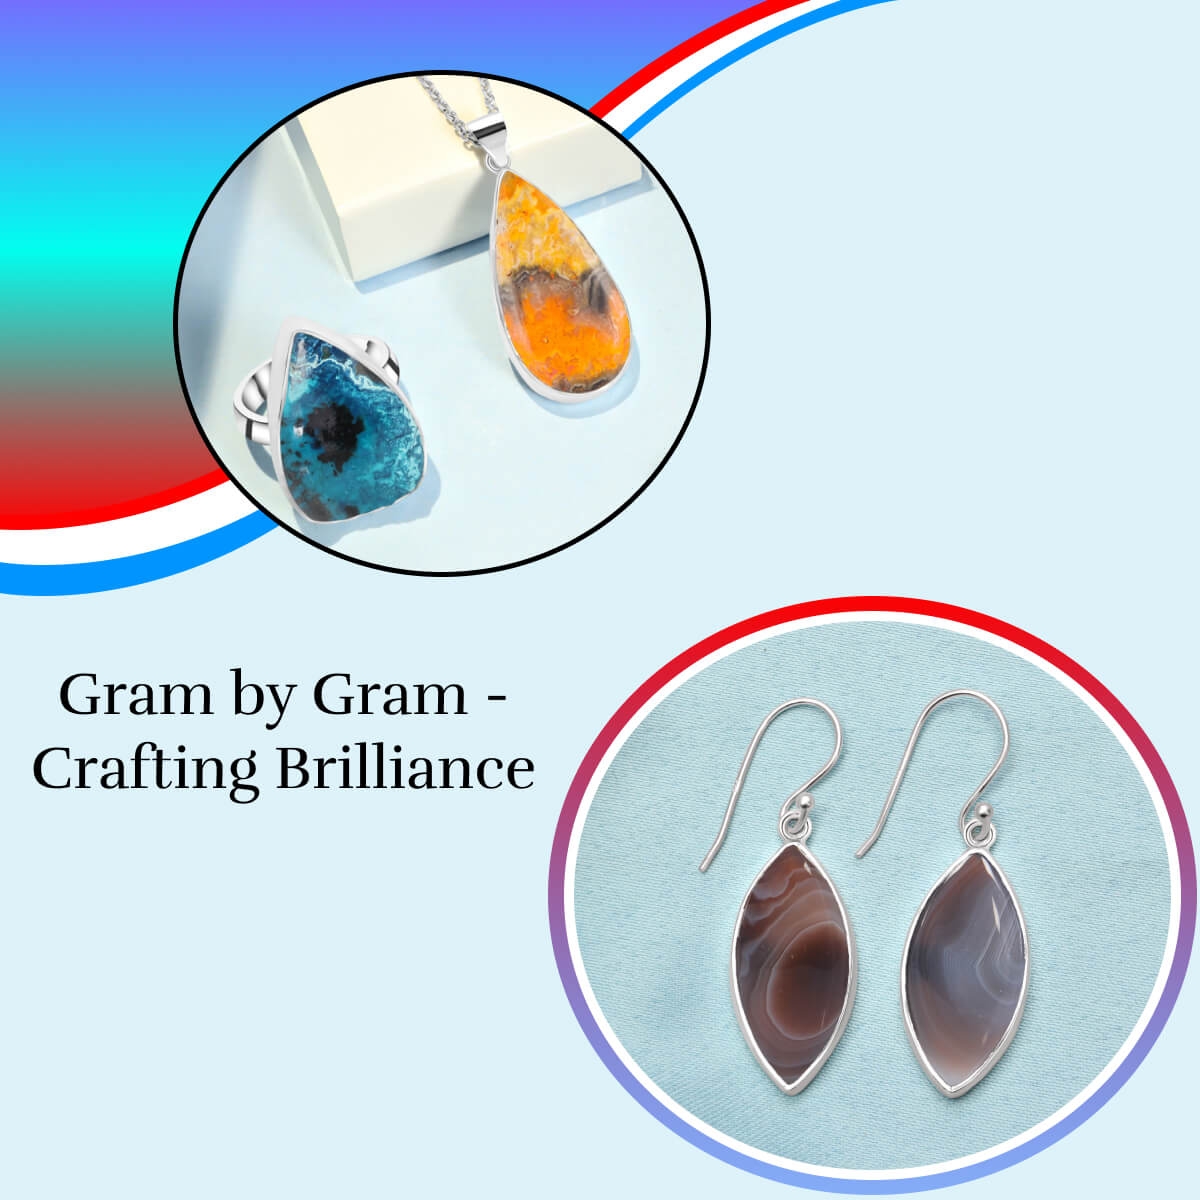 What Is Jewellery by Gram